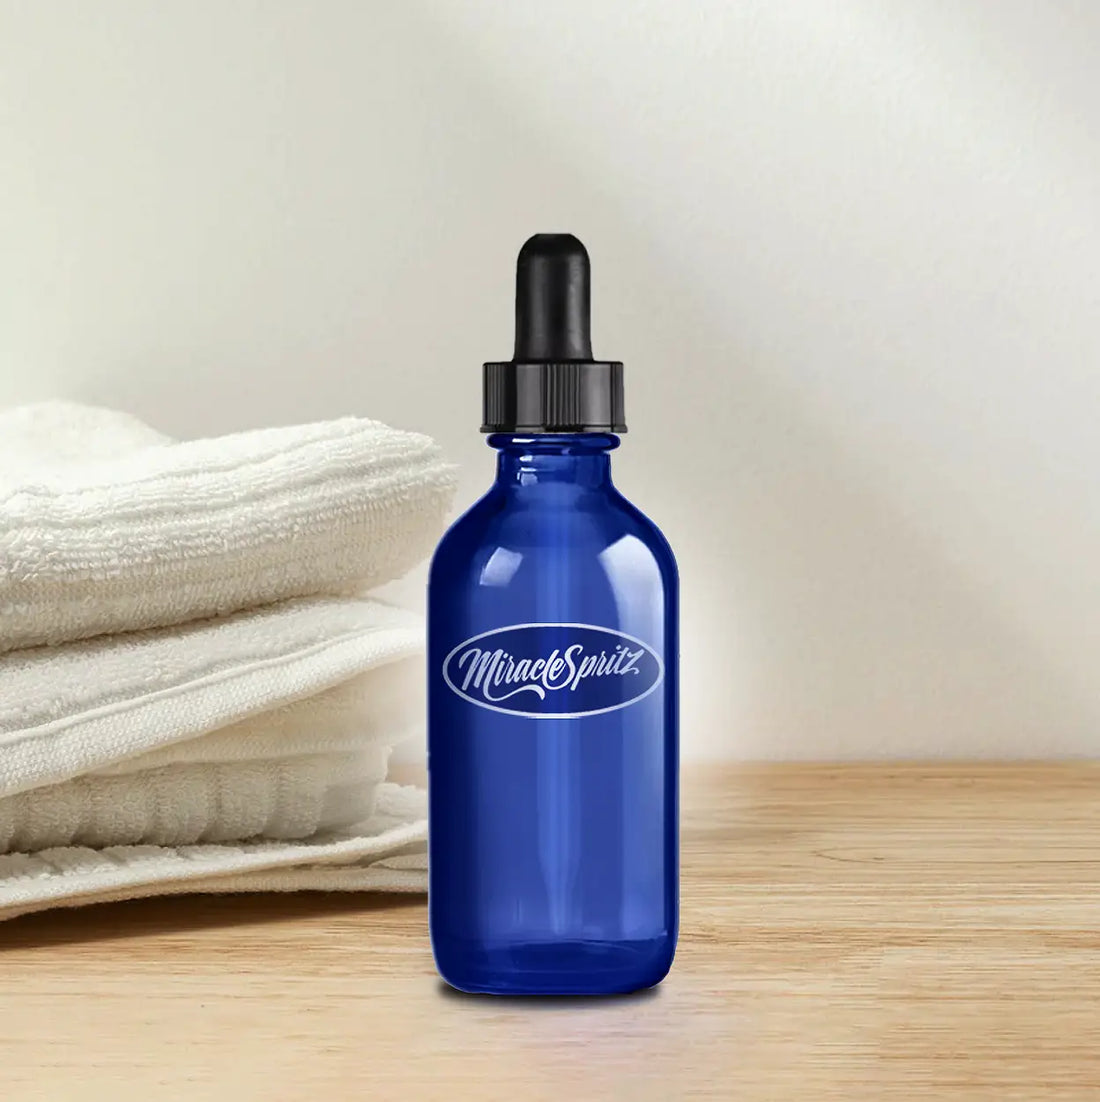 2oz dropper bottle of serum by Miracle Spritz